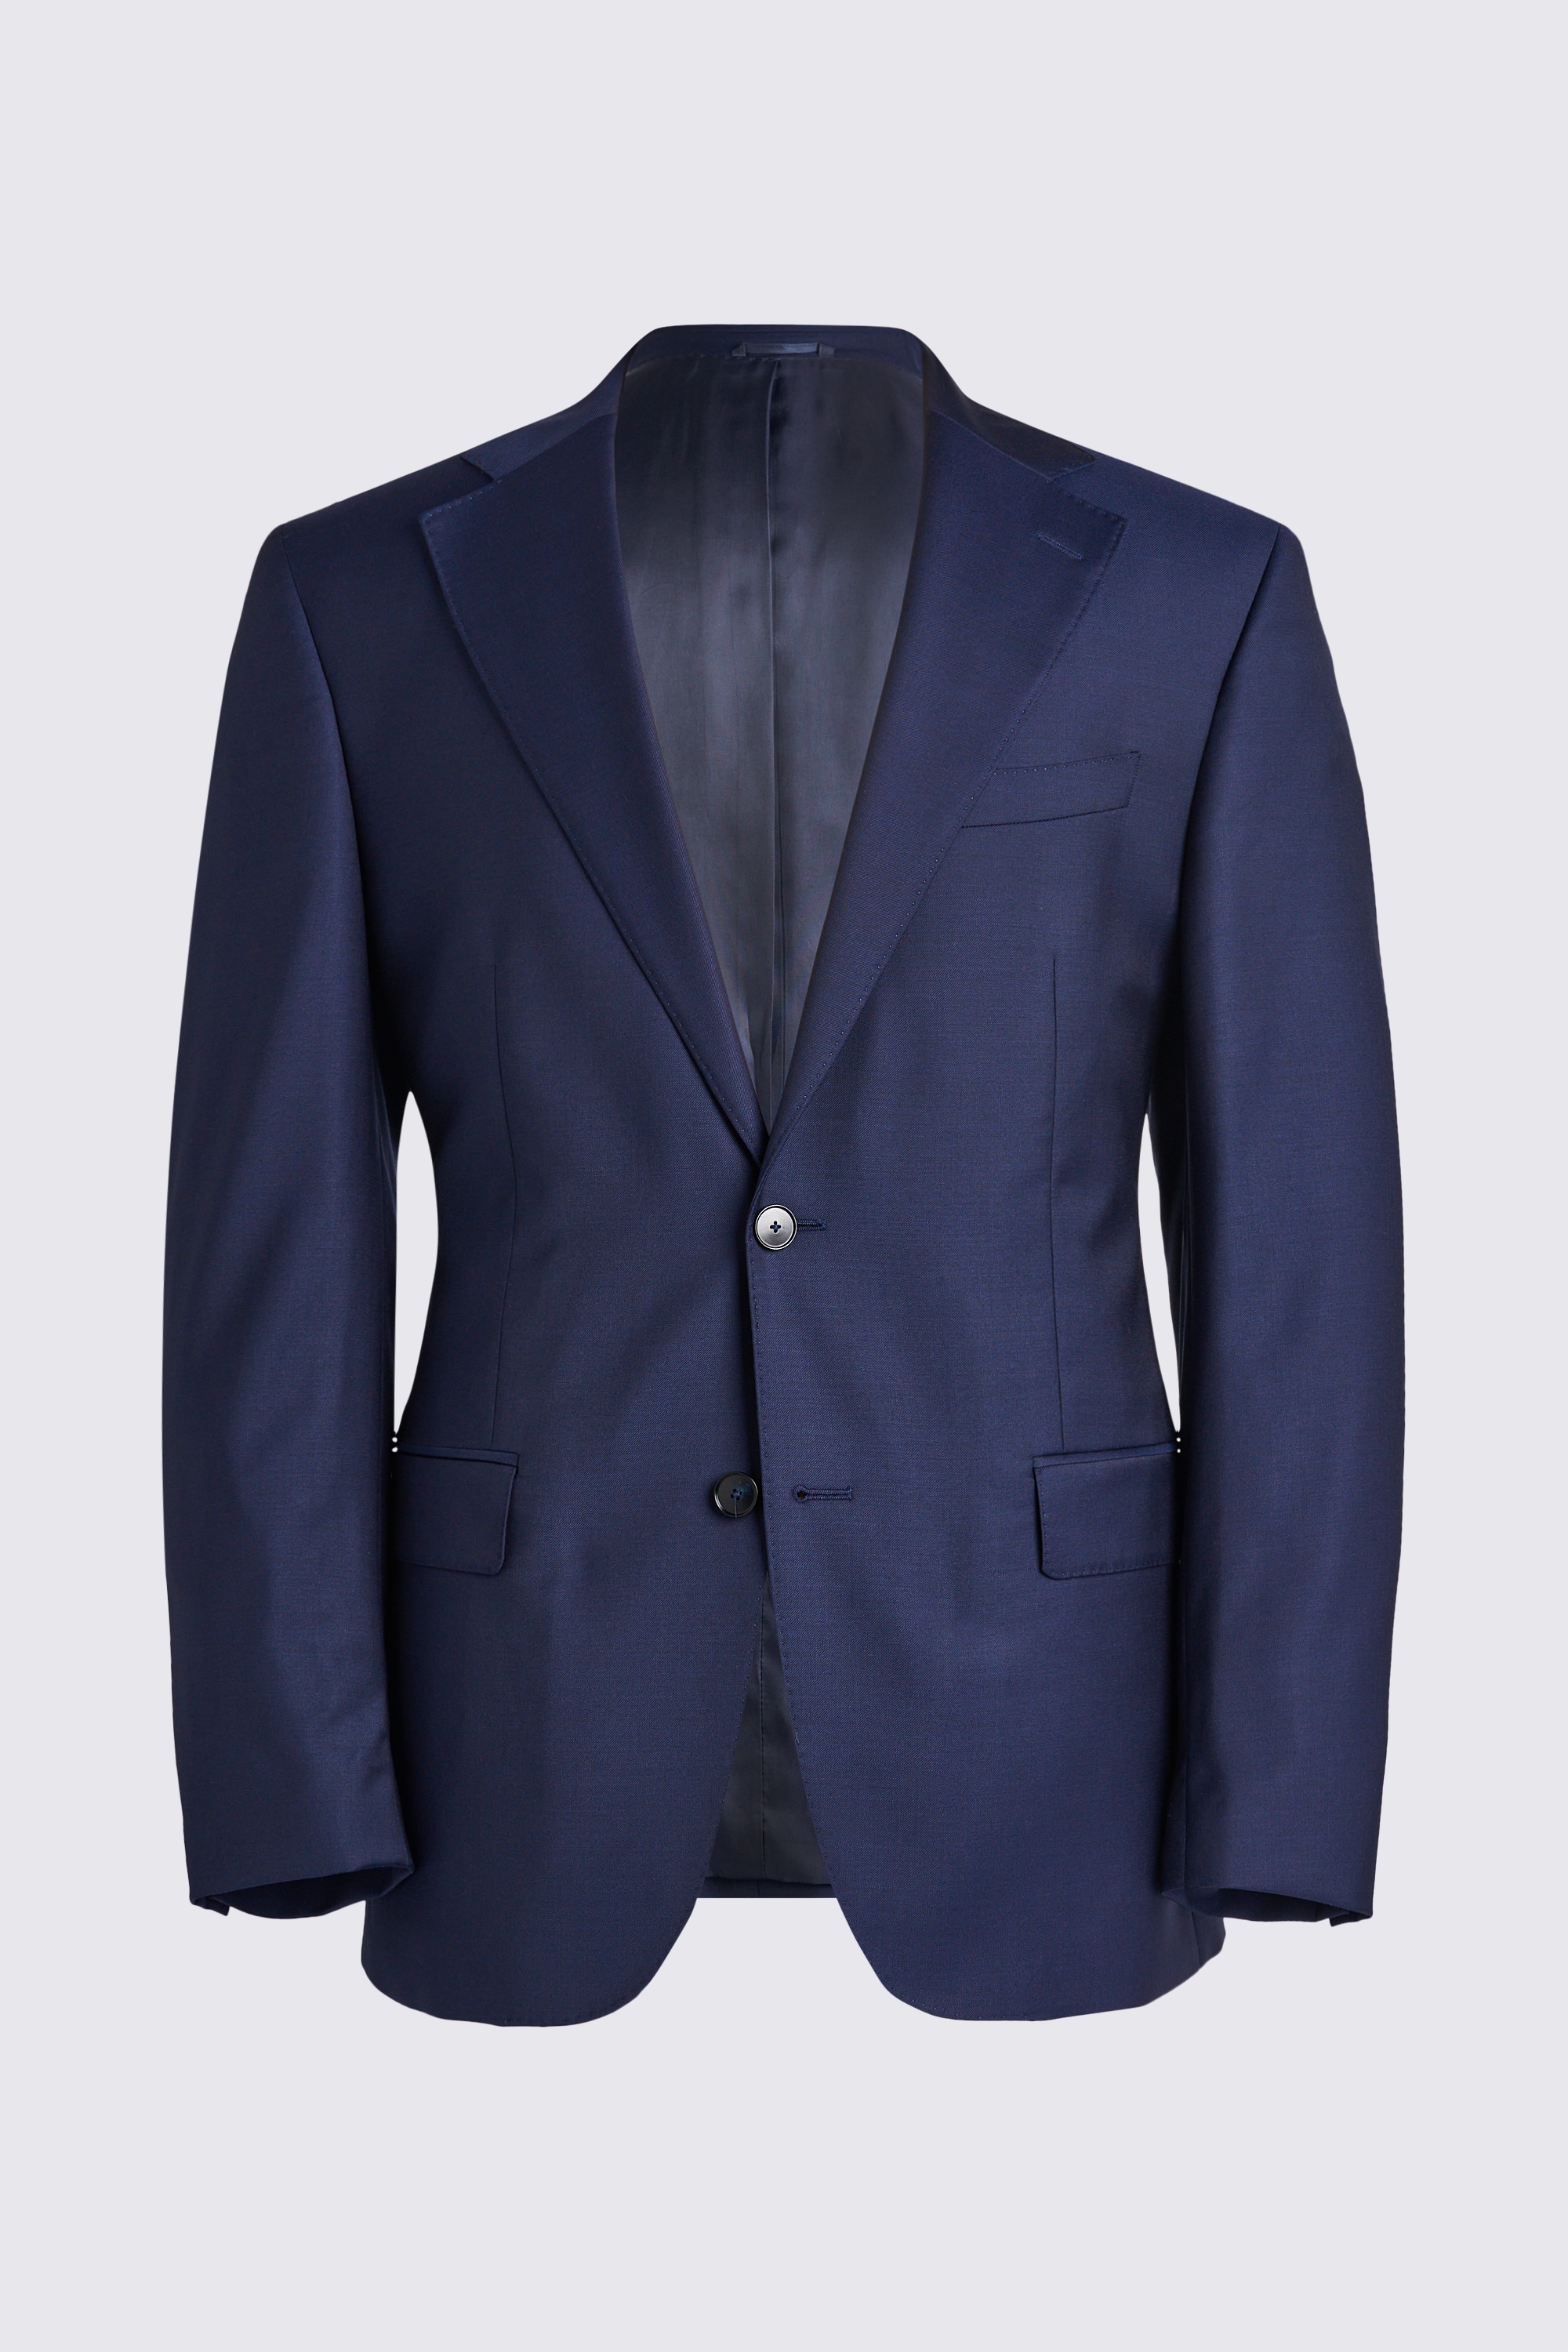 Italian Tailored Fit Navy Twill Jacket | Buy Online at Moss